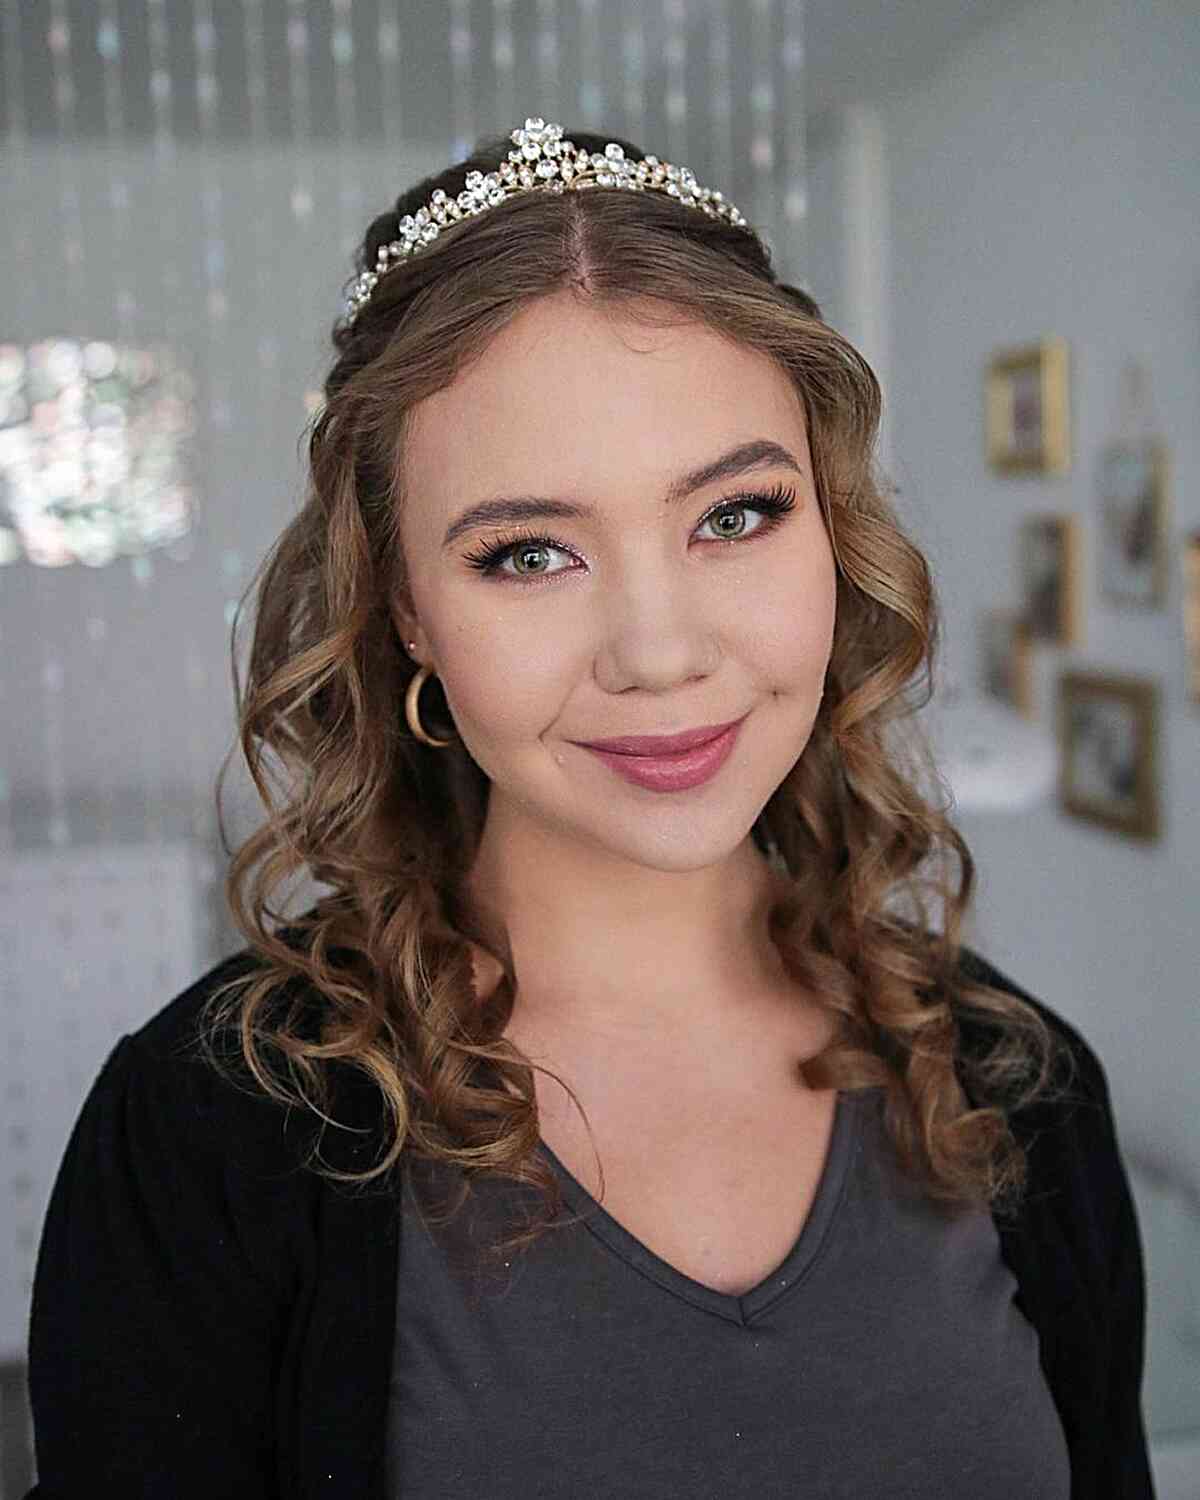 Curled Middle-Parted Hair with a Tiara Down Hairdo for Prom